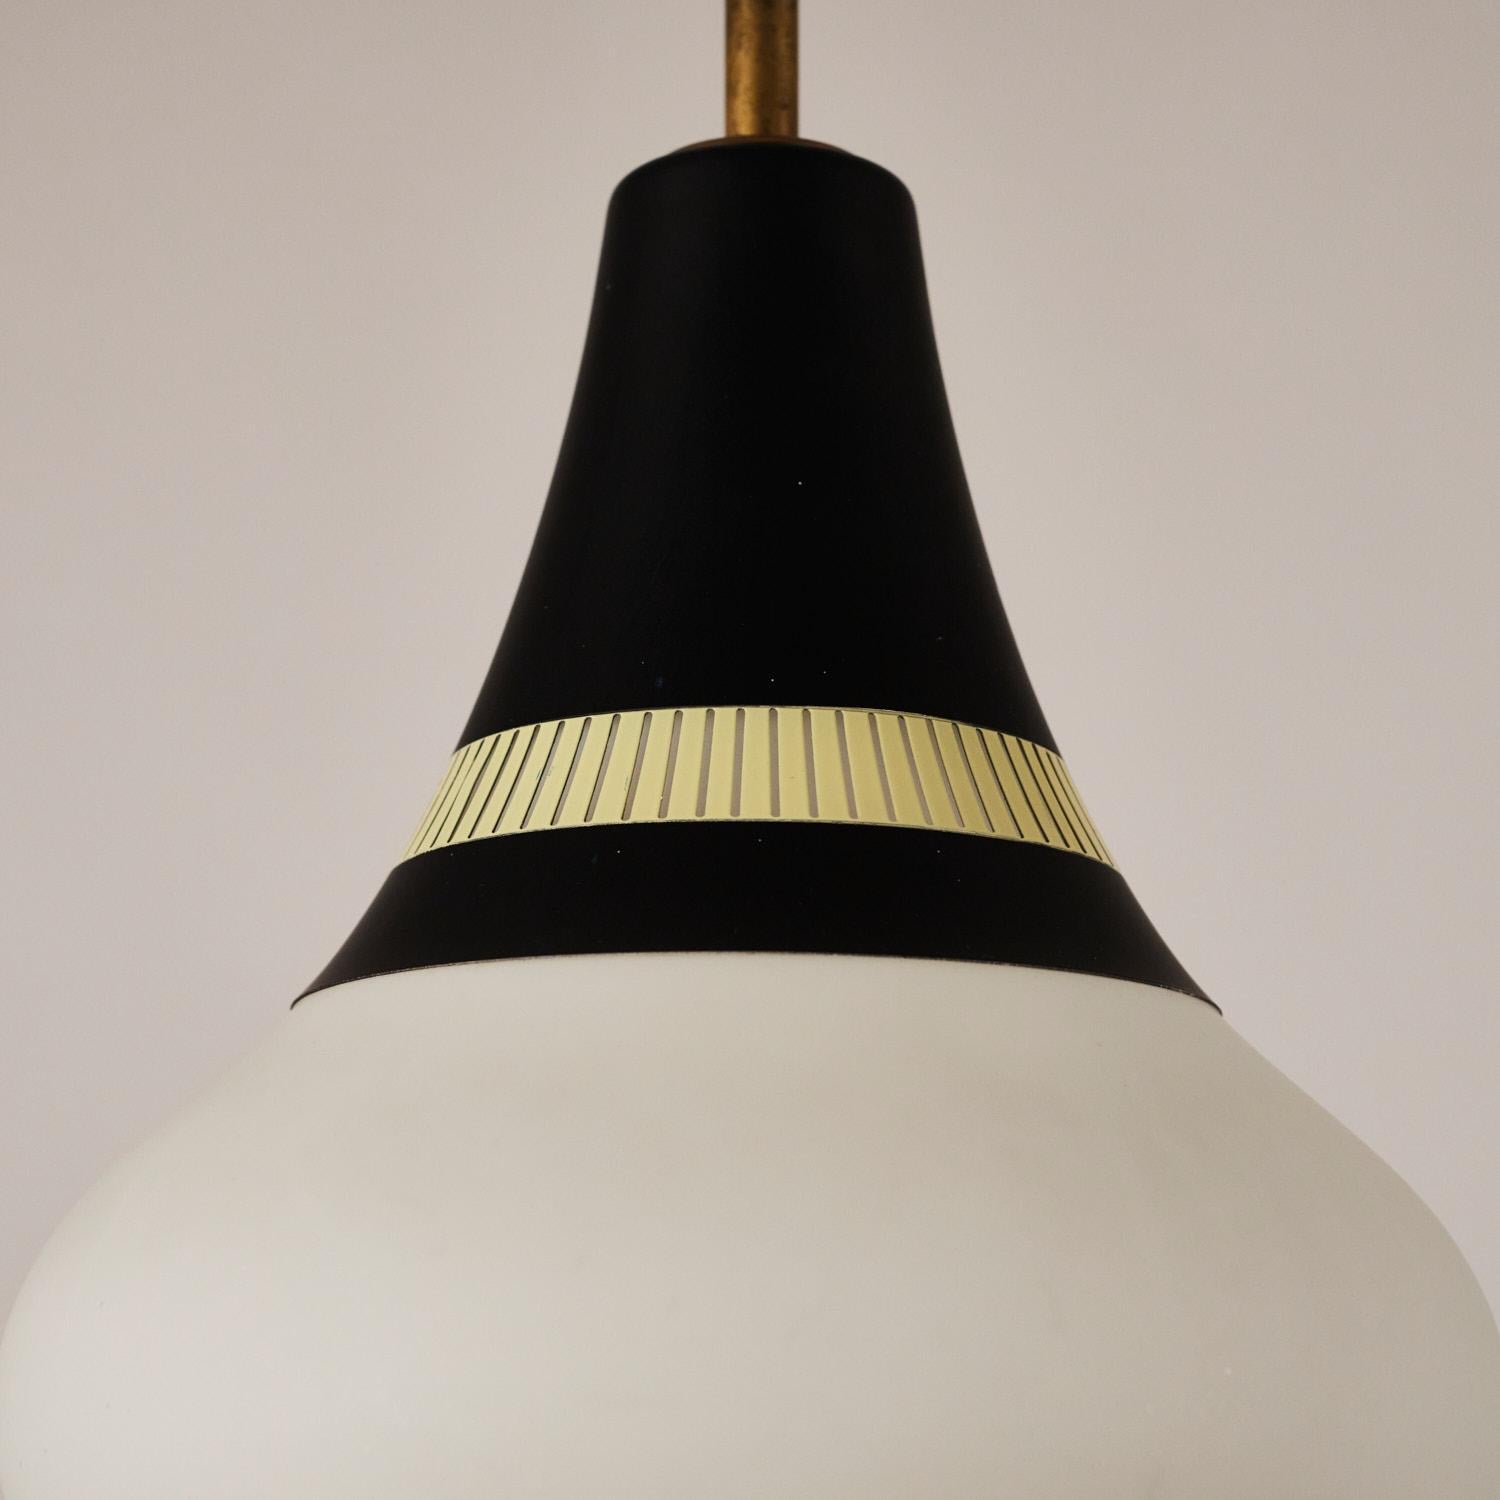 Original and rare white opaline glass pendants by Stilnovo, marked with manufacture label.